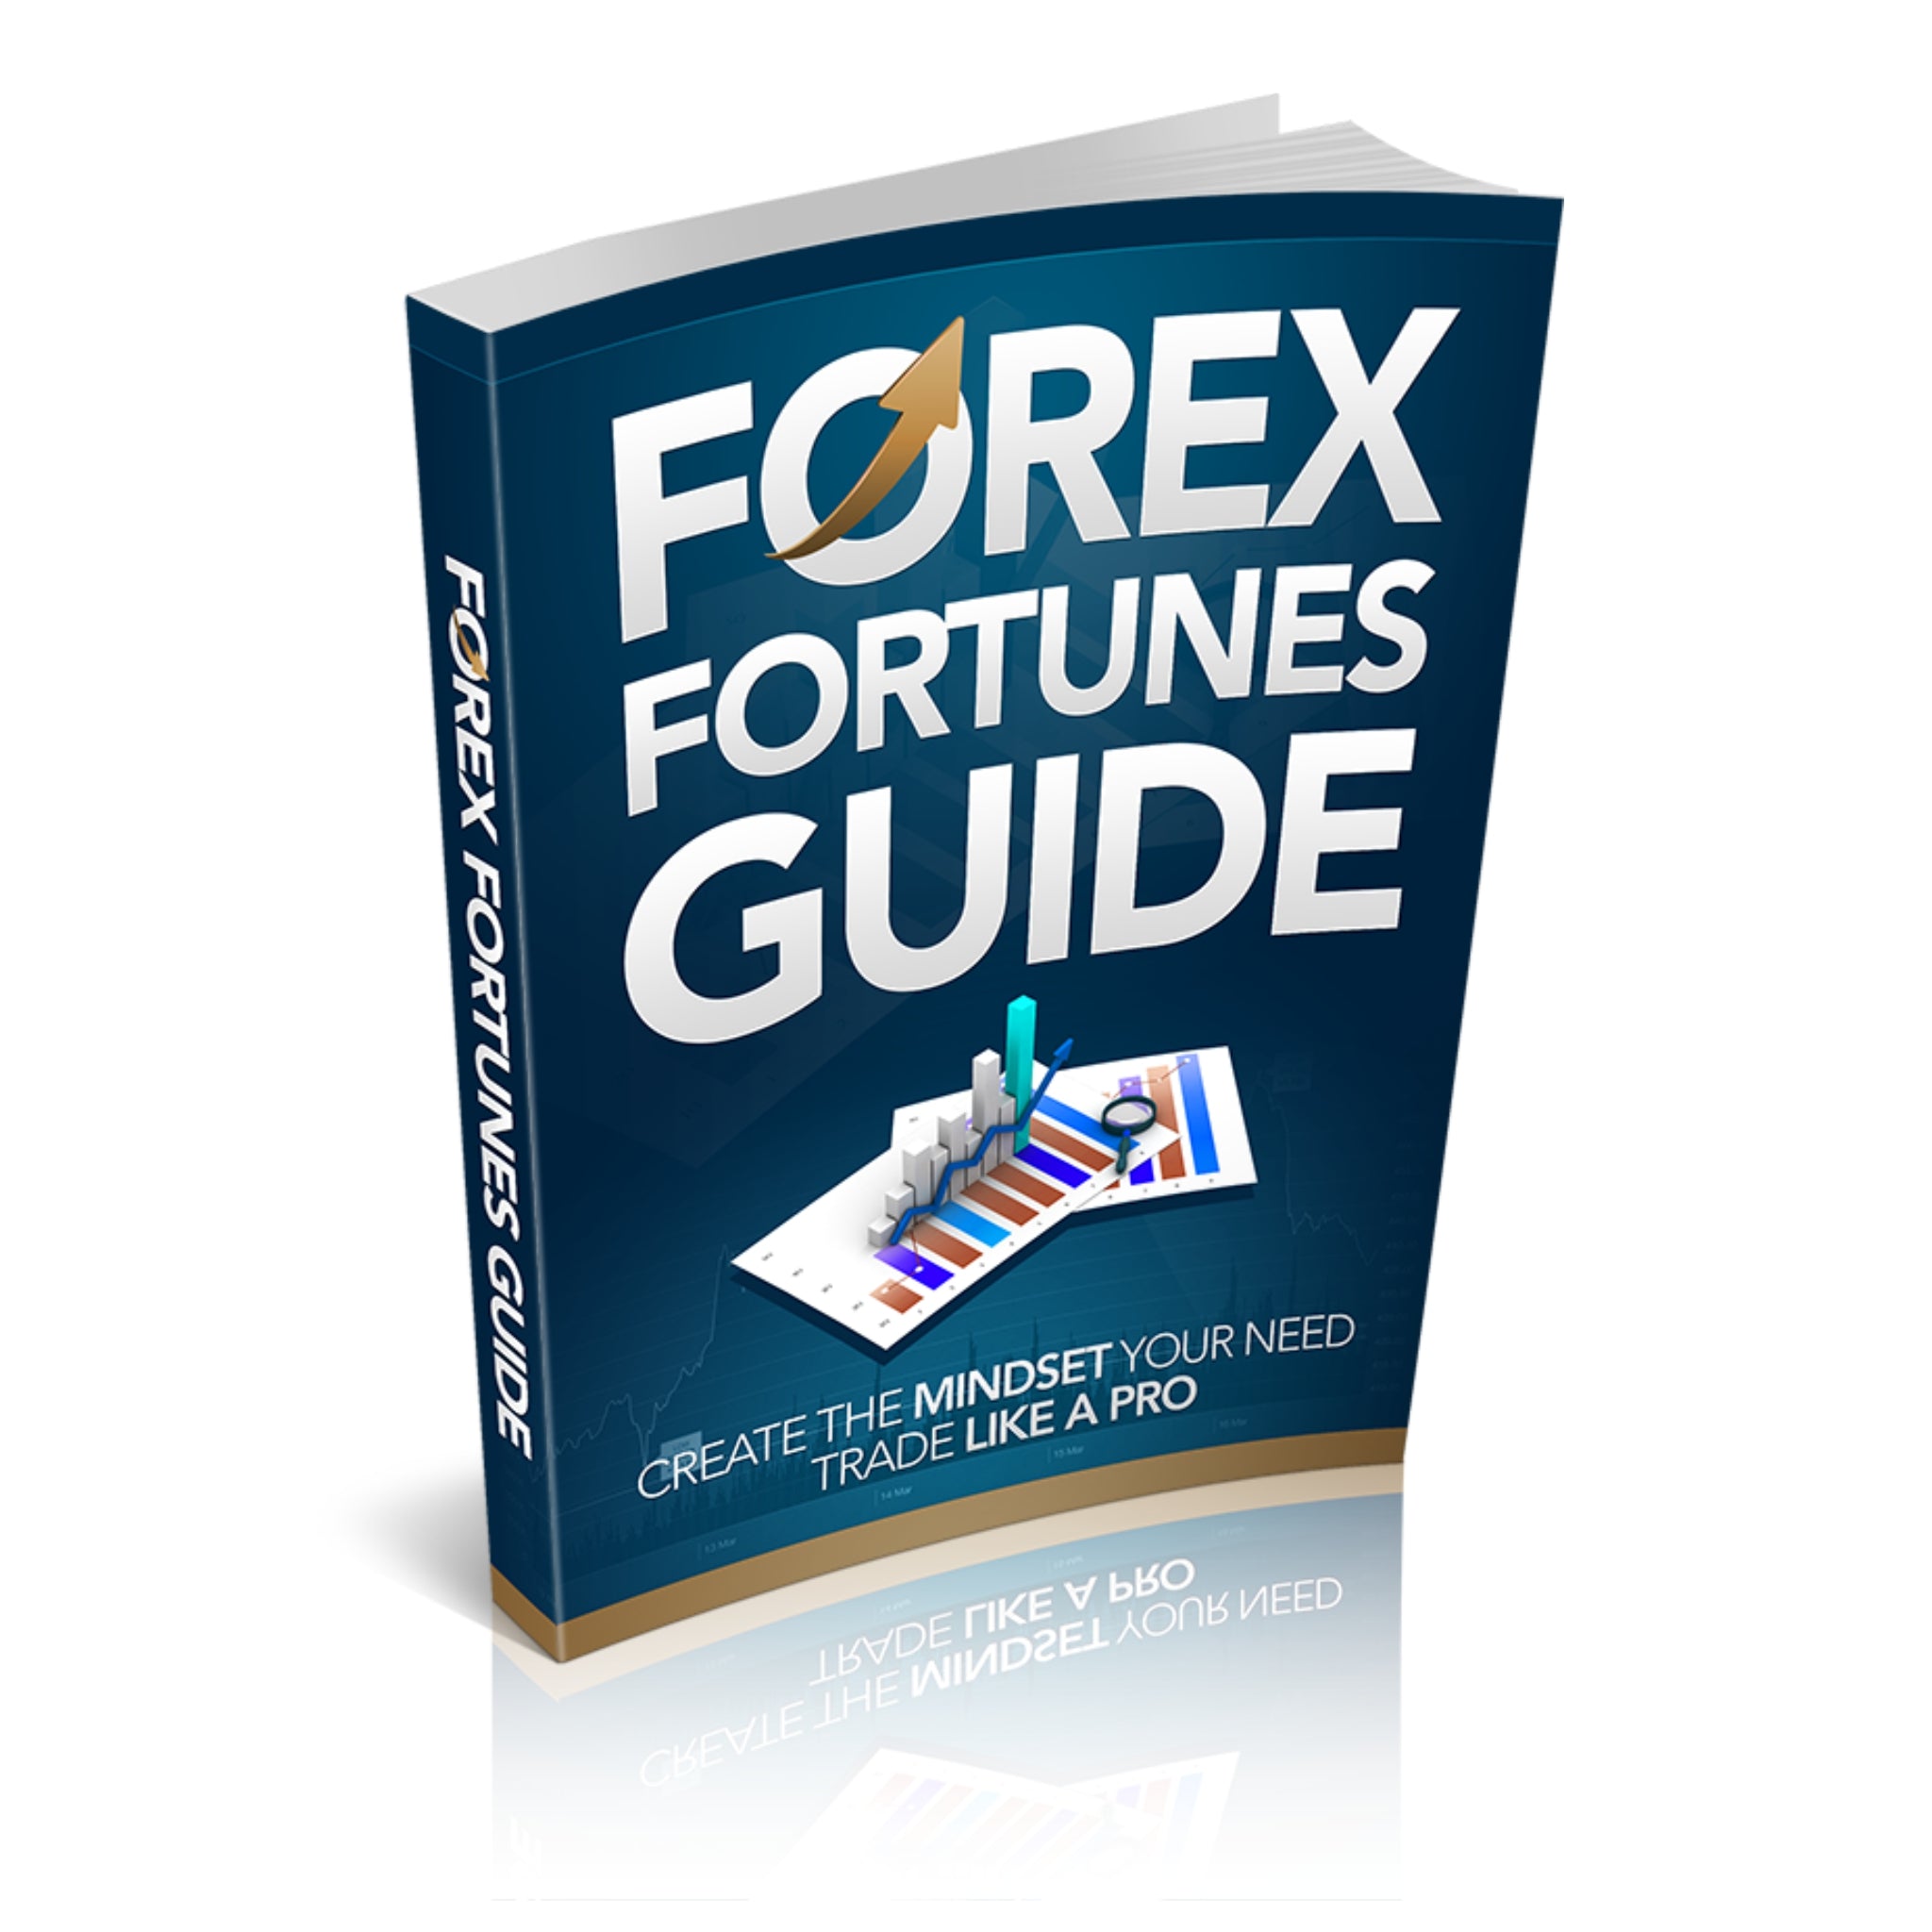 Forex Fortunes Guide Ebook